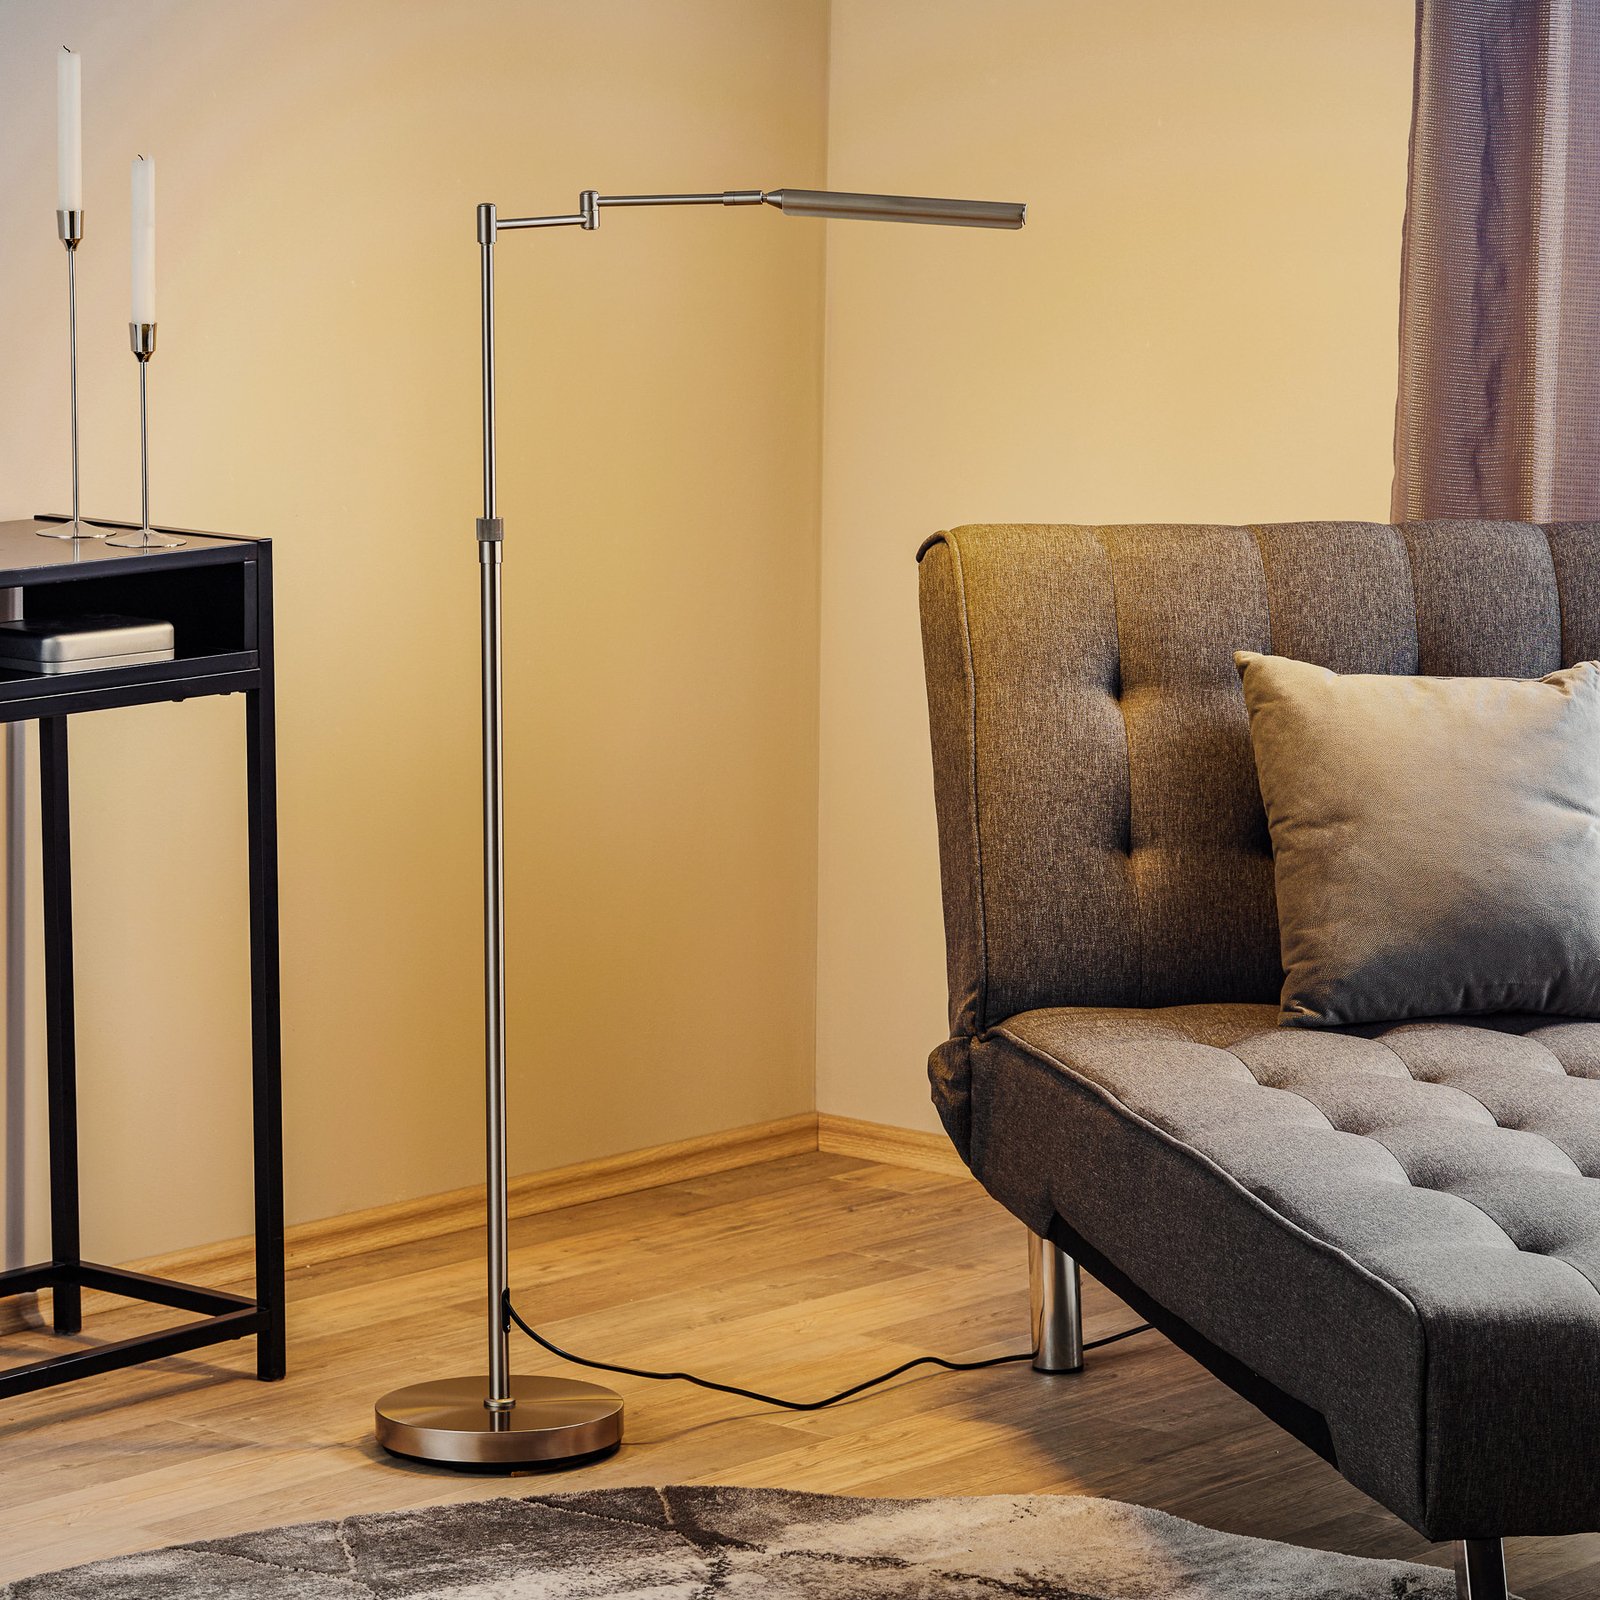 Nami LED floor lamp with foot dimmer, nickel